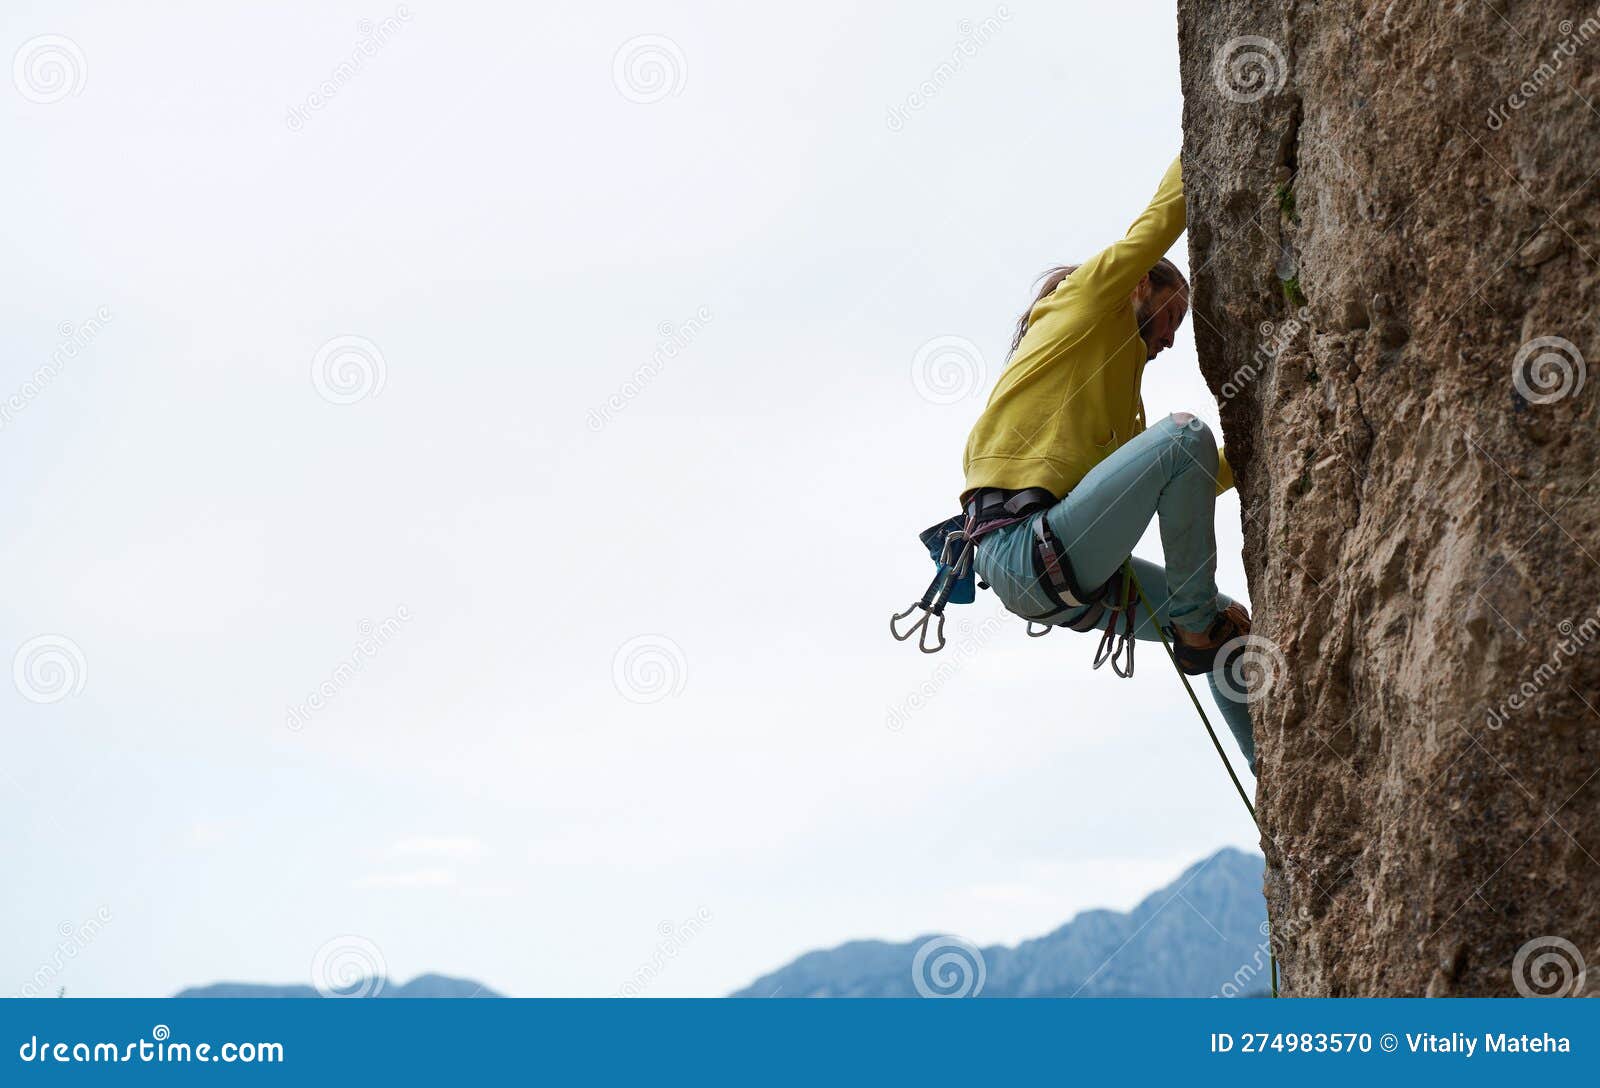 https://thumbs.dreamstime.com/z/flexible-skilled-man-climbing-vertical-rock-rope-lead-climbing-beautiful-mountains-view-background-side-view-flexible-274983570.jpg